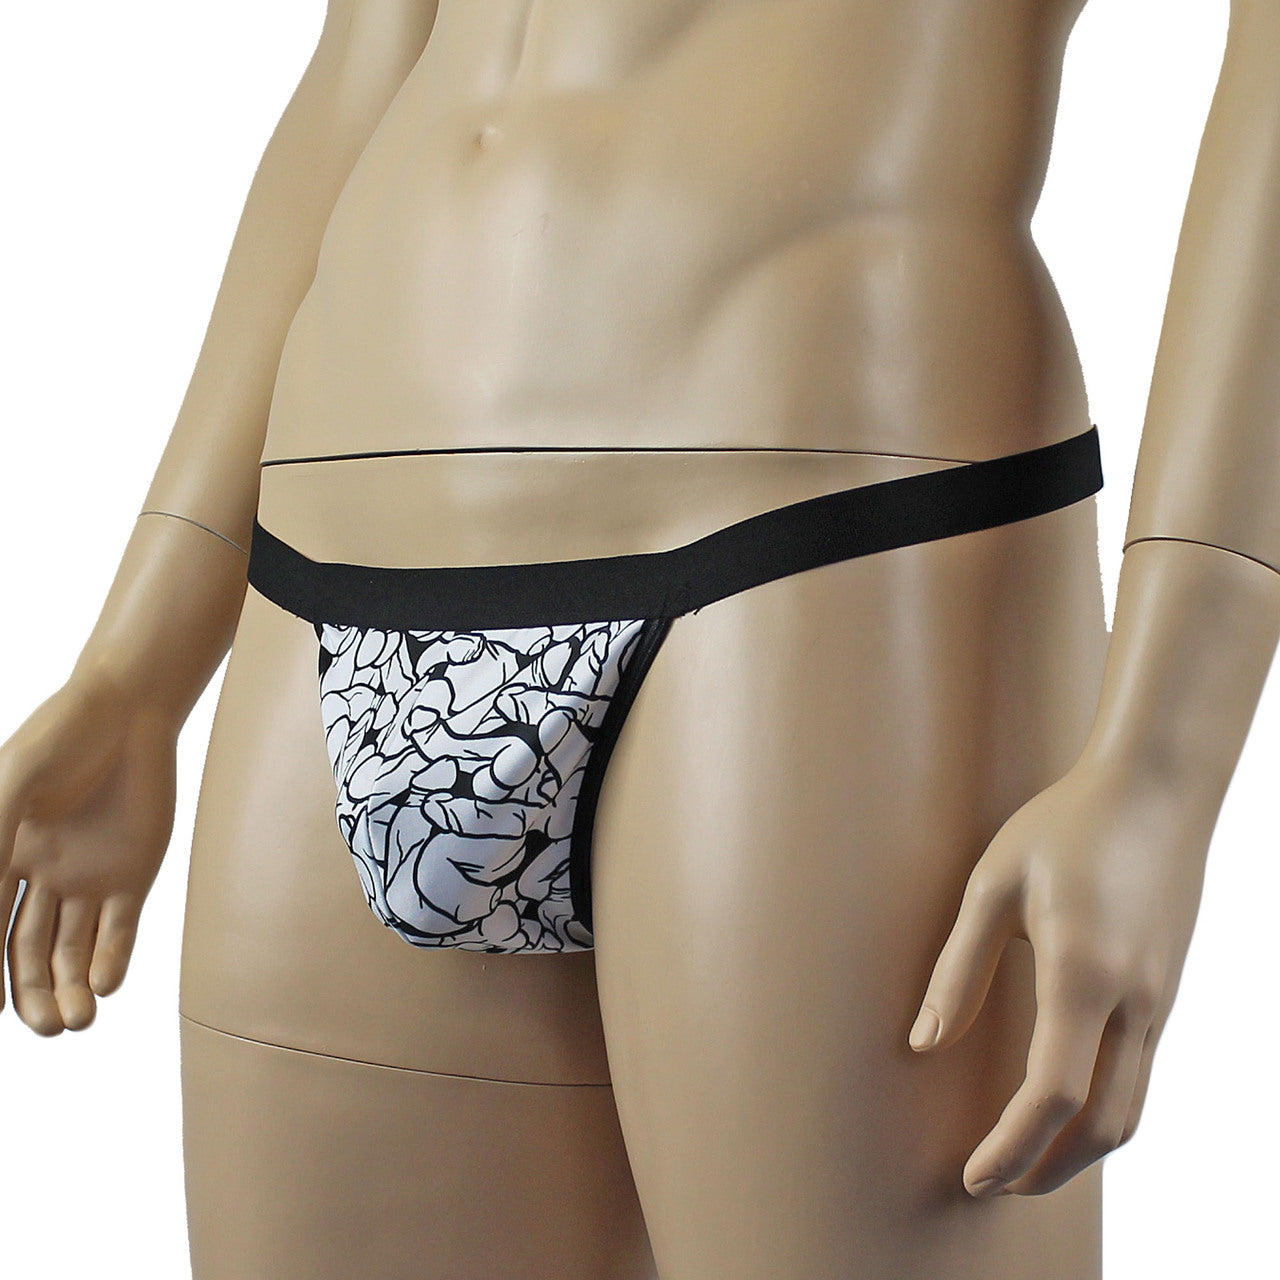 Male Willie G string Thong with Naughty Print Black and White